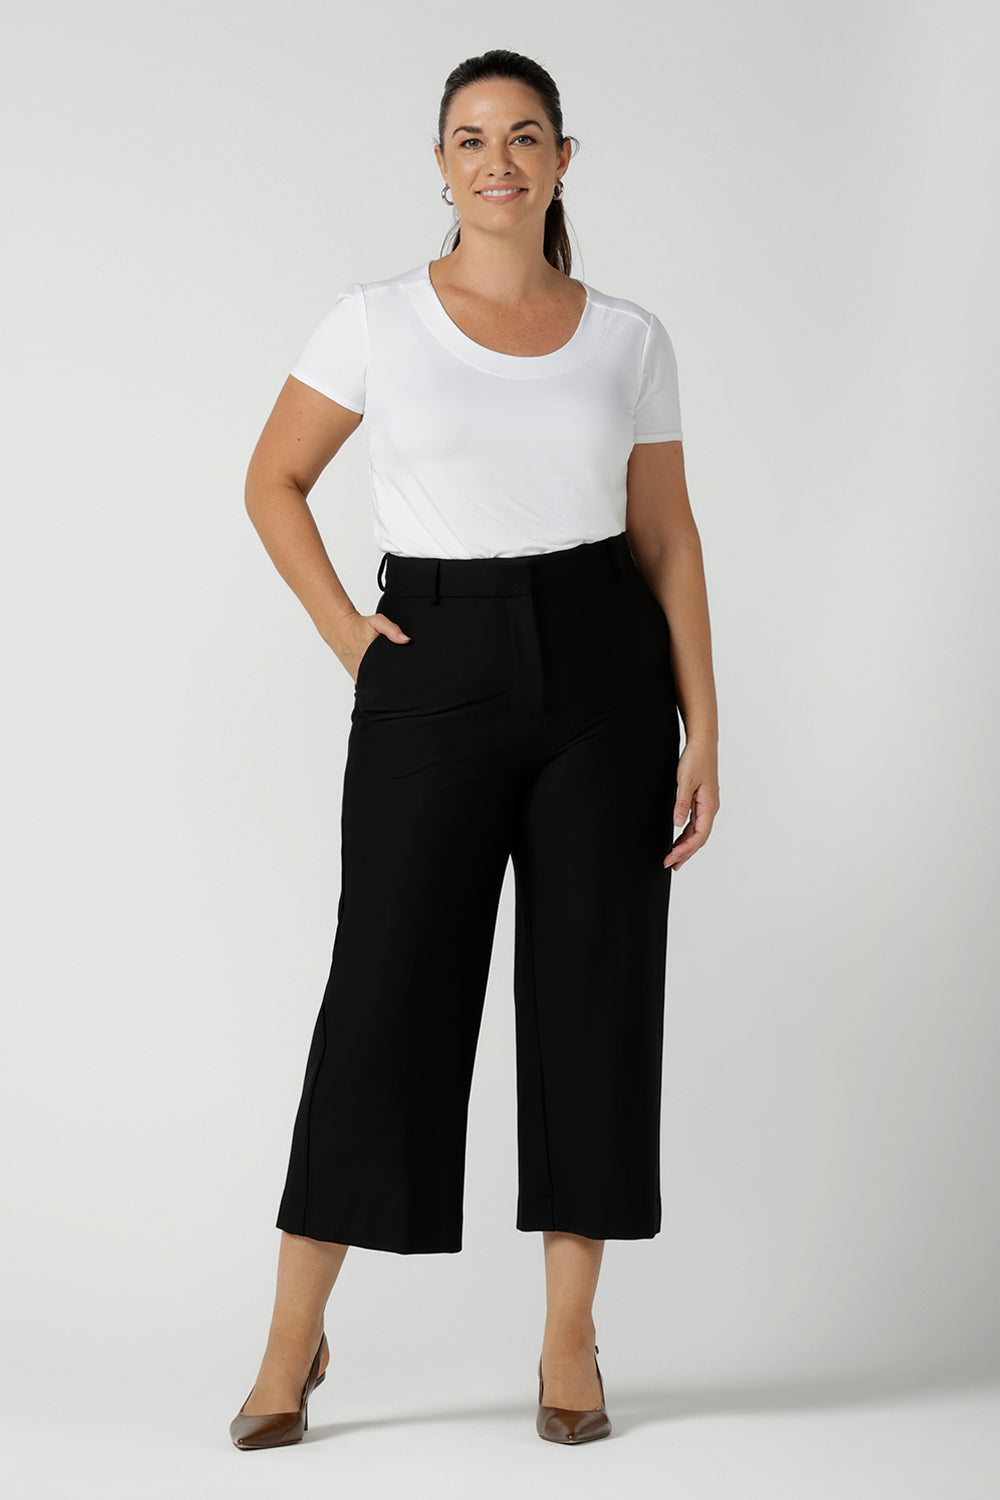 Size 12 woman wears Yael culotte in black. High waist tailored pant with pockets and fly front. Comfortable corporate work pants in culotte length. Petite heigh friendly. Made in Australia for women size 8 - 24.